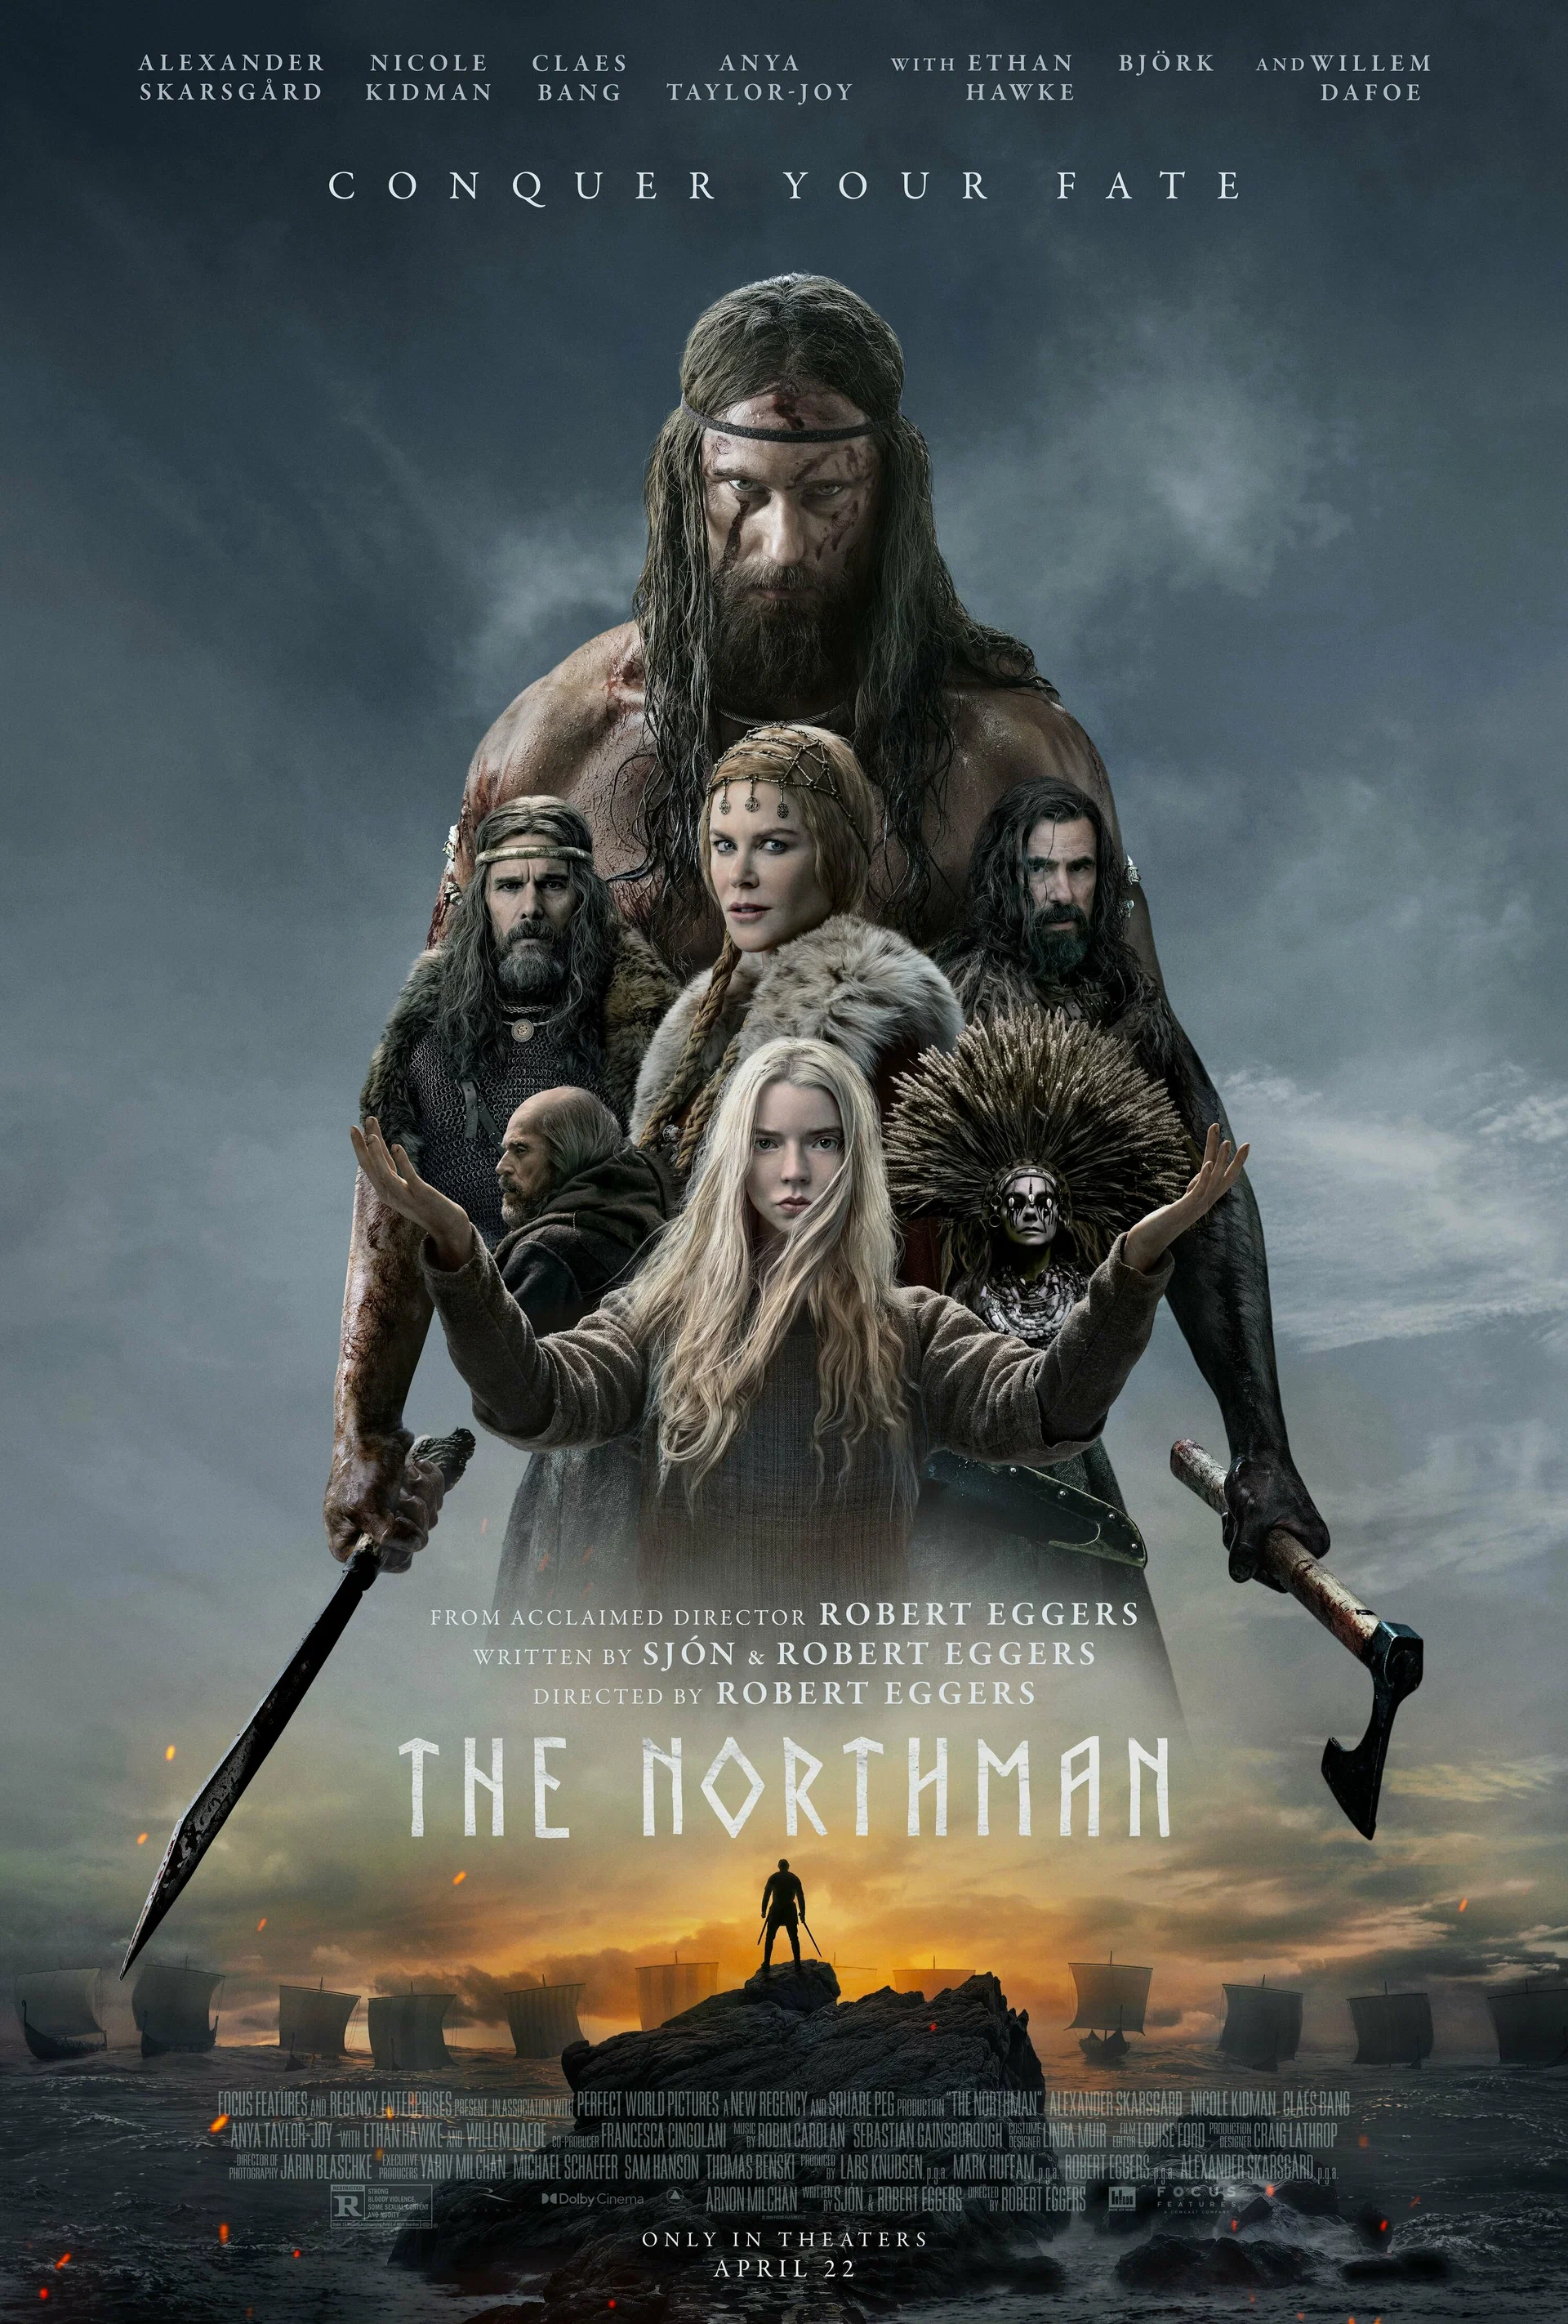 Varyag / The Northman (2022), Fantastic Beasts: Dumbledore's Mysteries (2022) and what else you can see - My, What to see, I advise you to look, Poster, Movies, New films, Screenshot, Brad Pitt, Channing Tatum, Actors and actresses, A selection, Humor, Comedy, Боевики, Hollywood, Sandra Bullock, Daniel Radcliffe, Fantastic Beasts: Mysteries of Dumbledore, Harry Potter, Screen adaptation, Nicole Kidman, Longpost